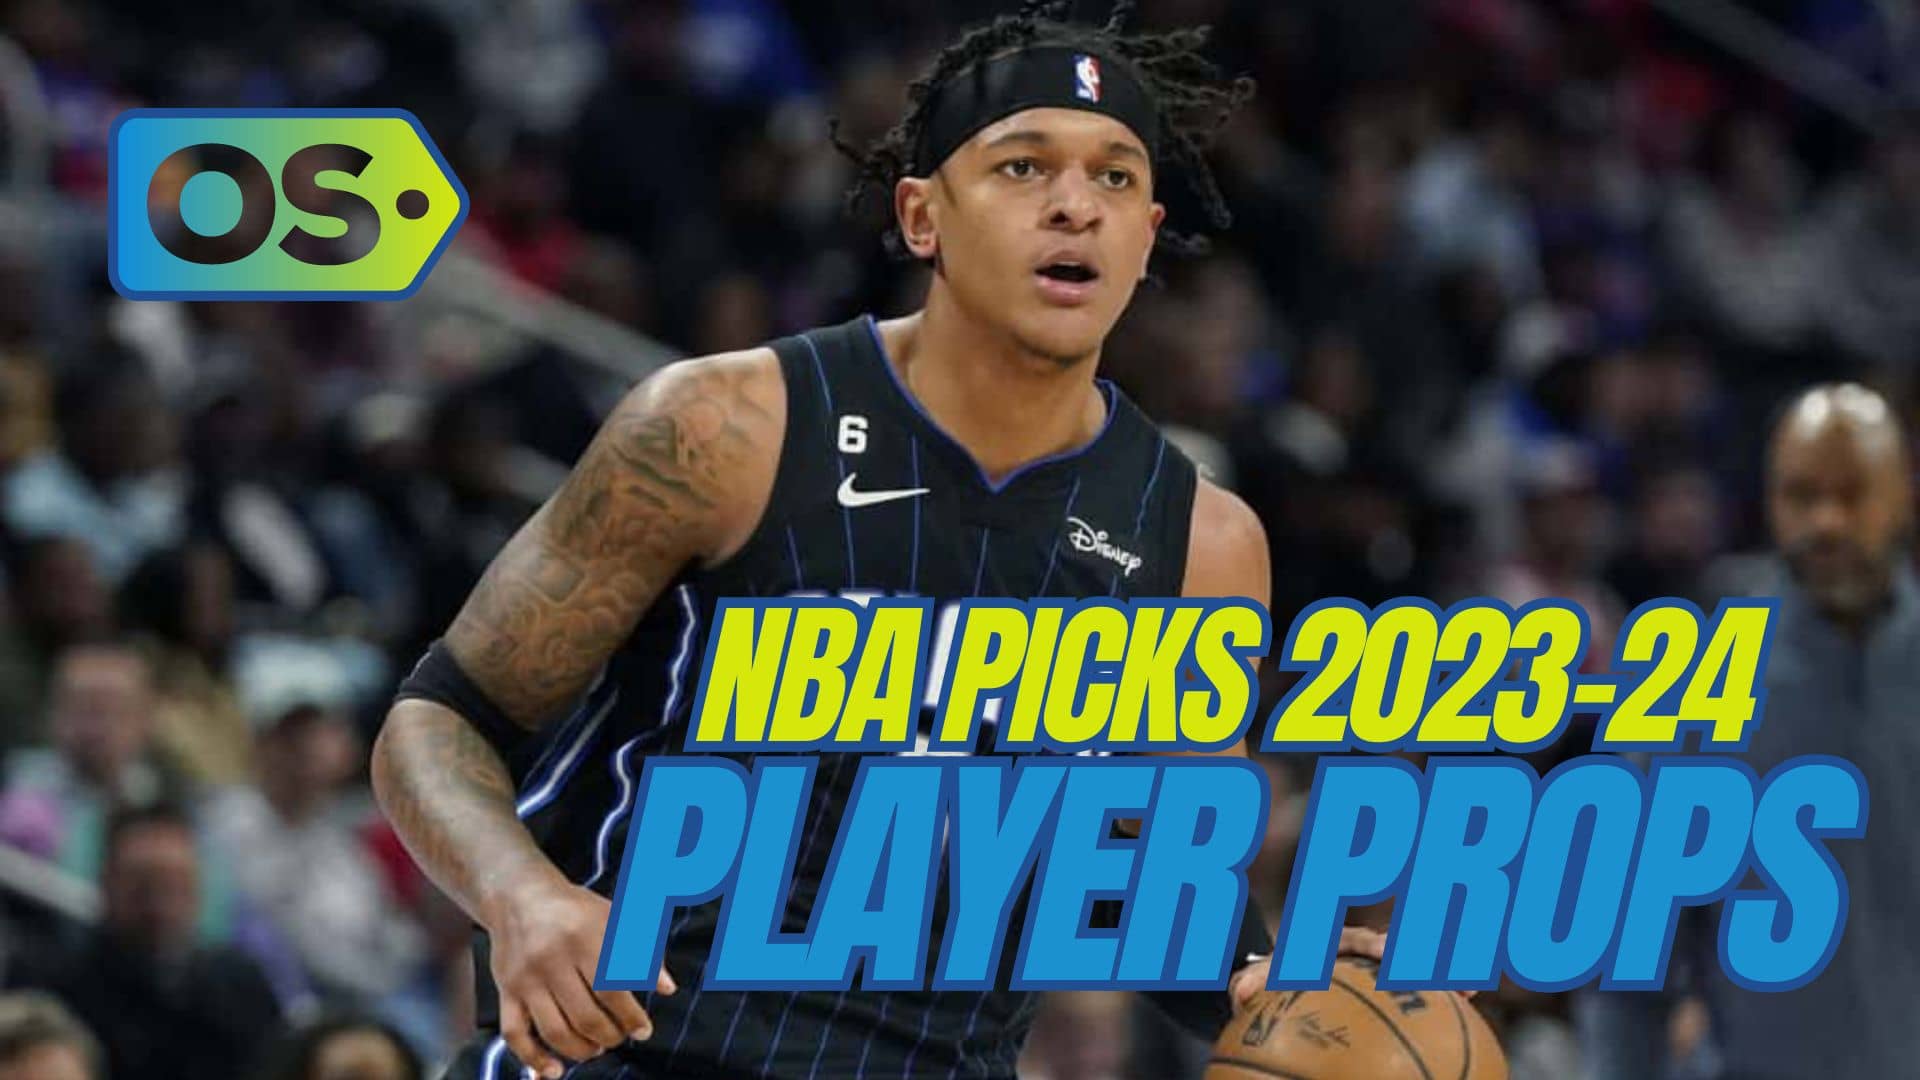 The best NBA player prop bets and picks today for Wednesday, March 6, include wagers on Paolo Banchero and Luguentz Dort.